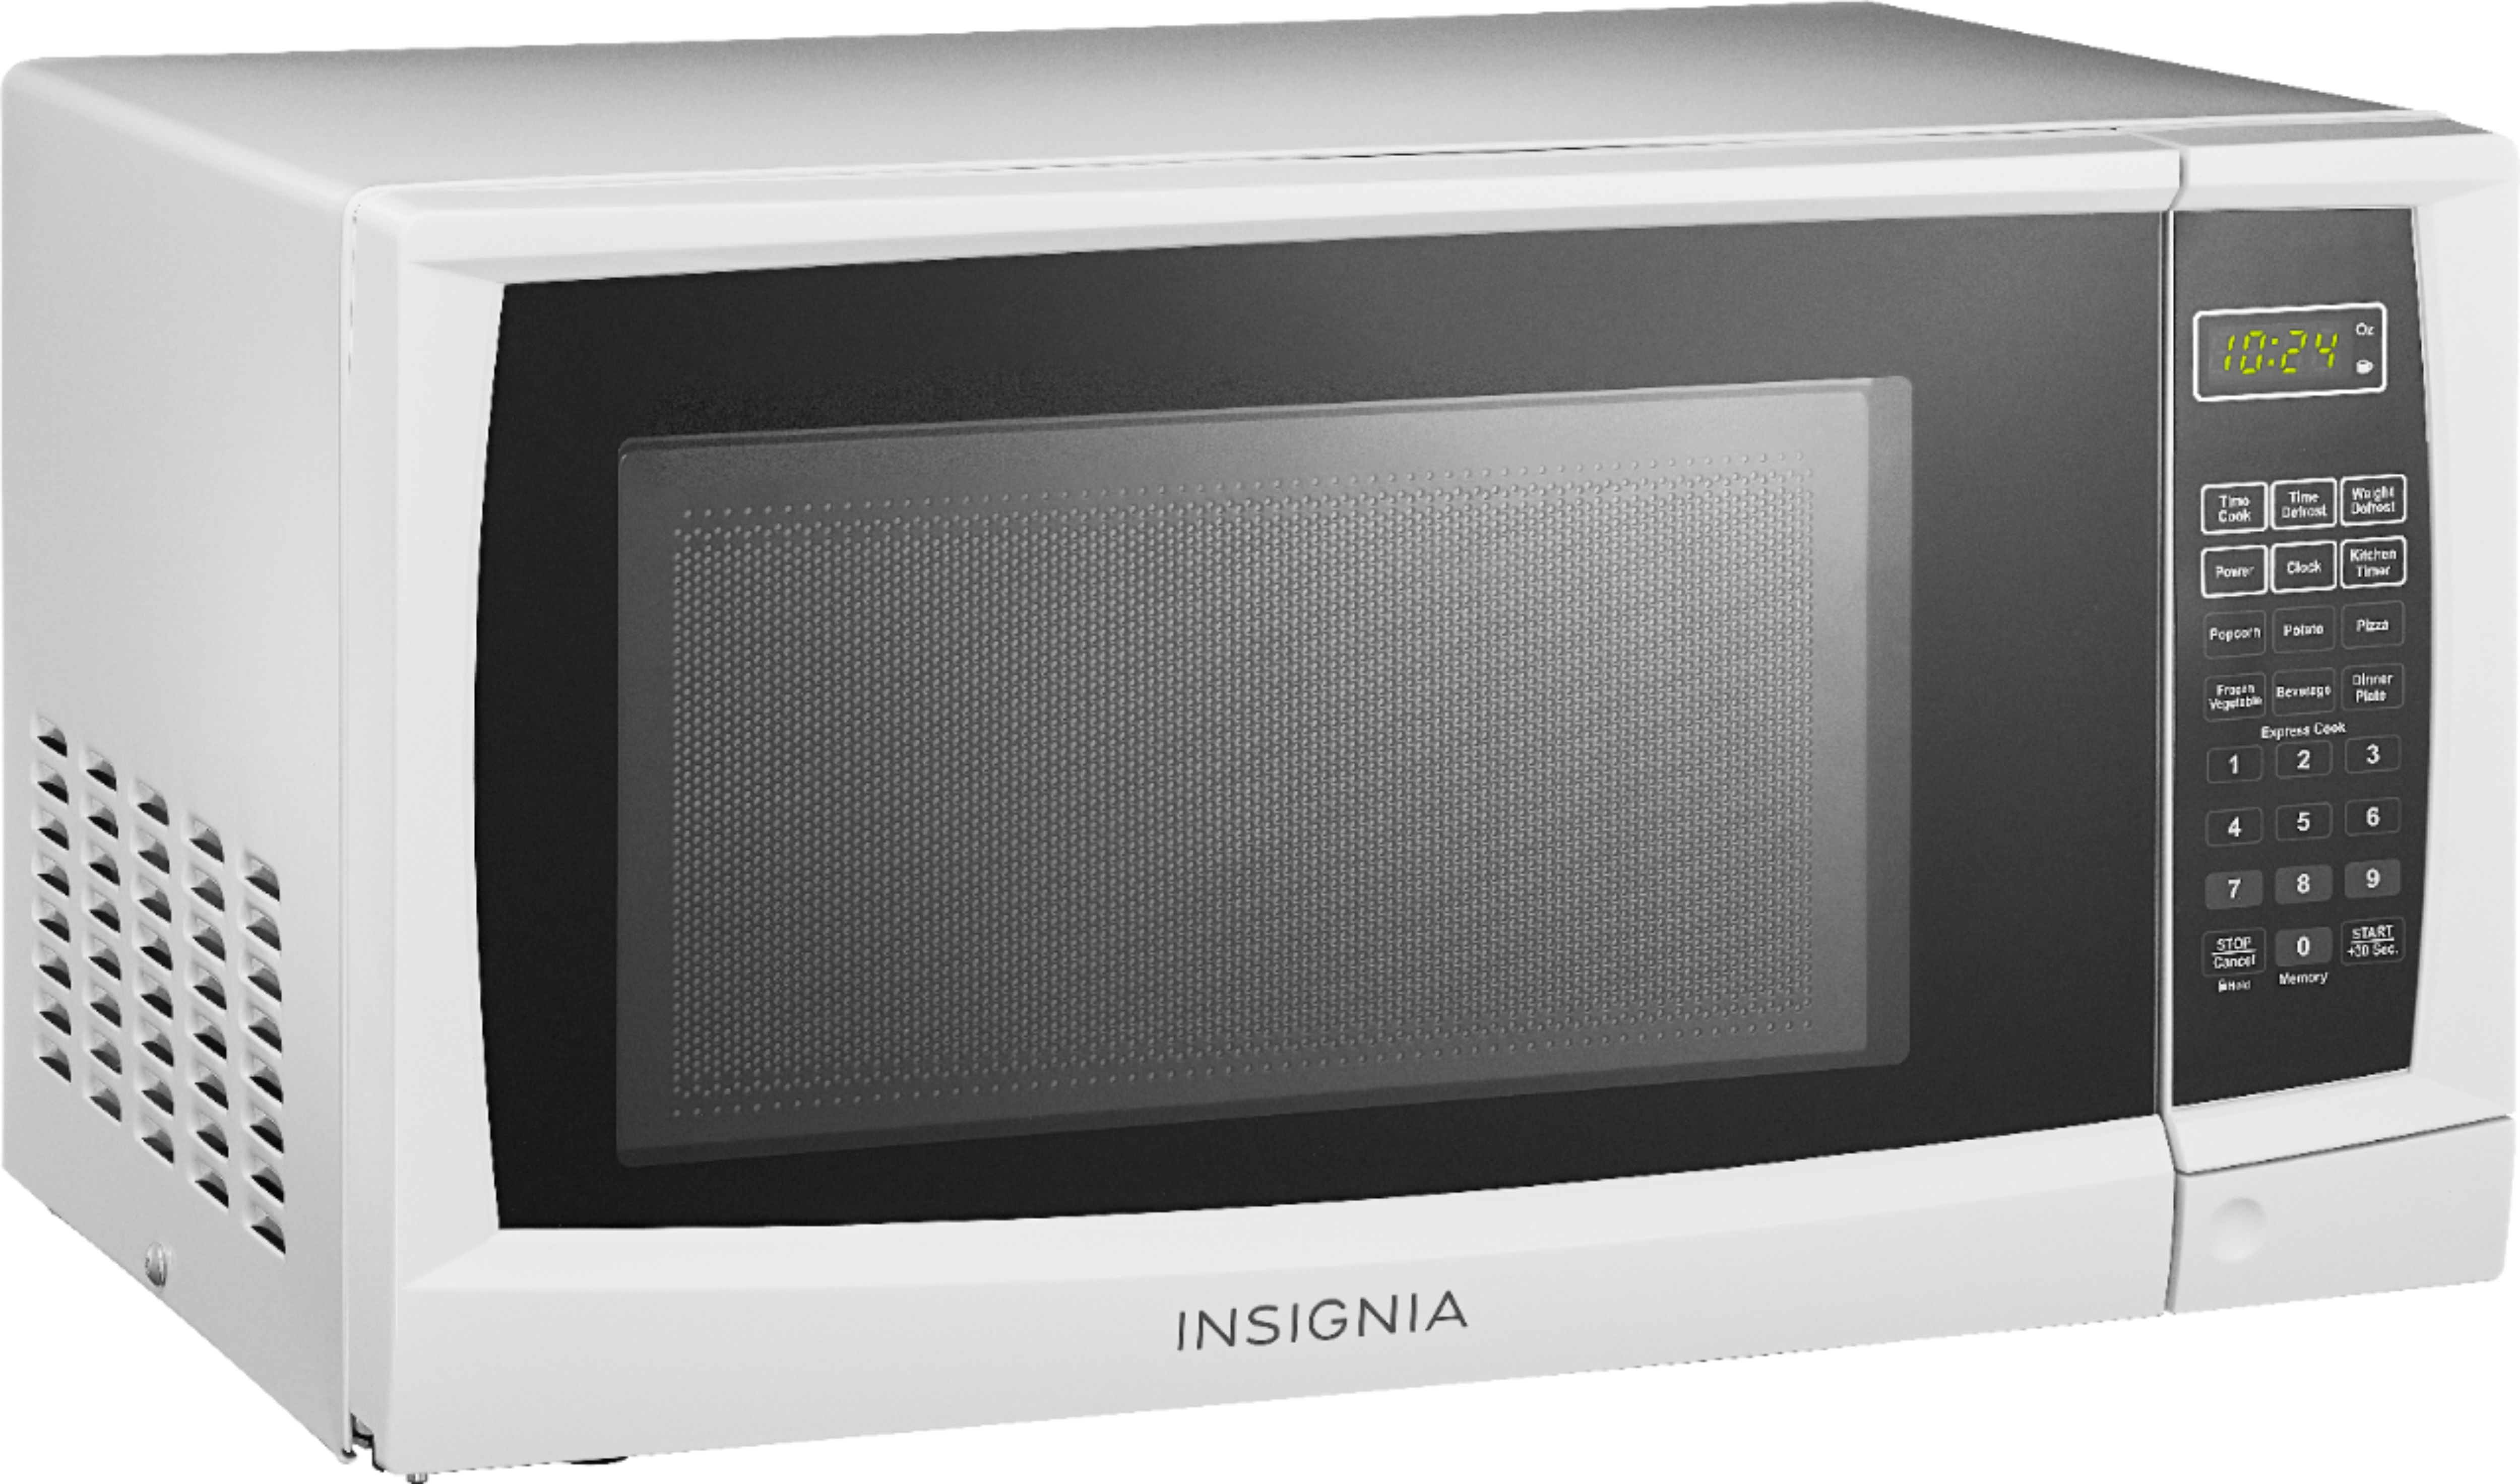 Angle View: GE - 0.7 Cu. Ft. Compact Microwave - Stainless steel